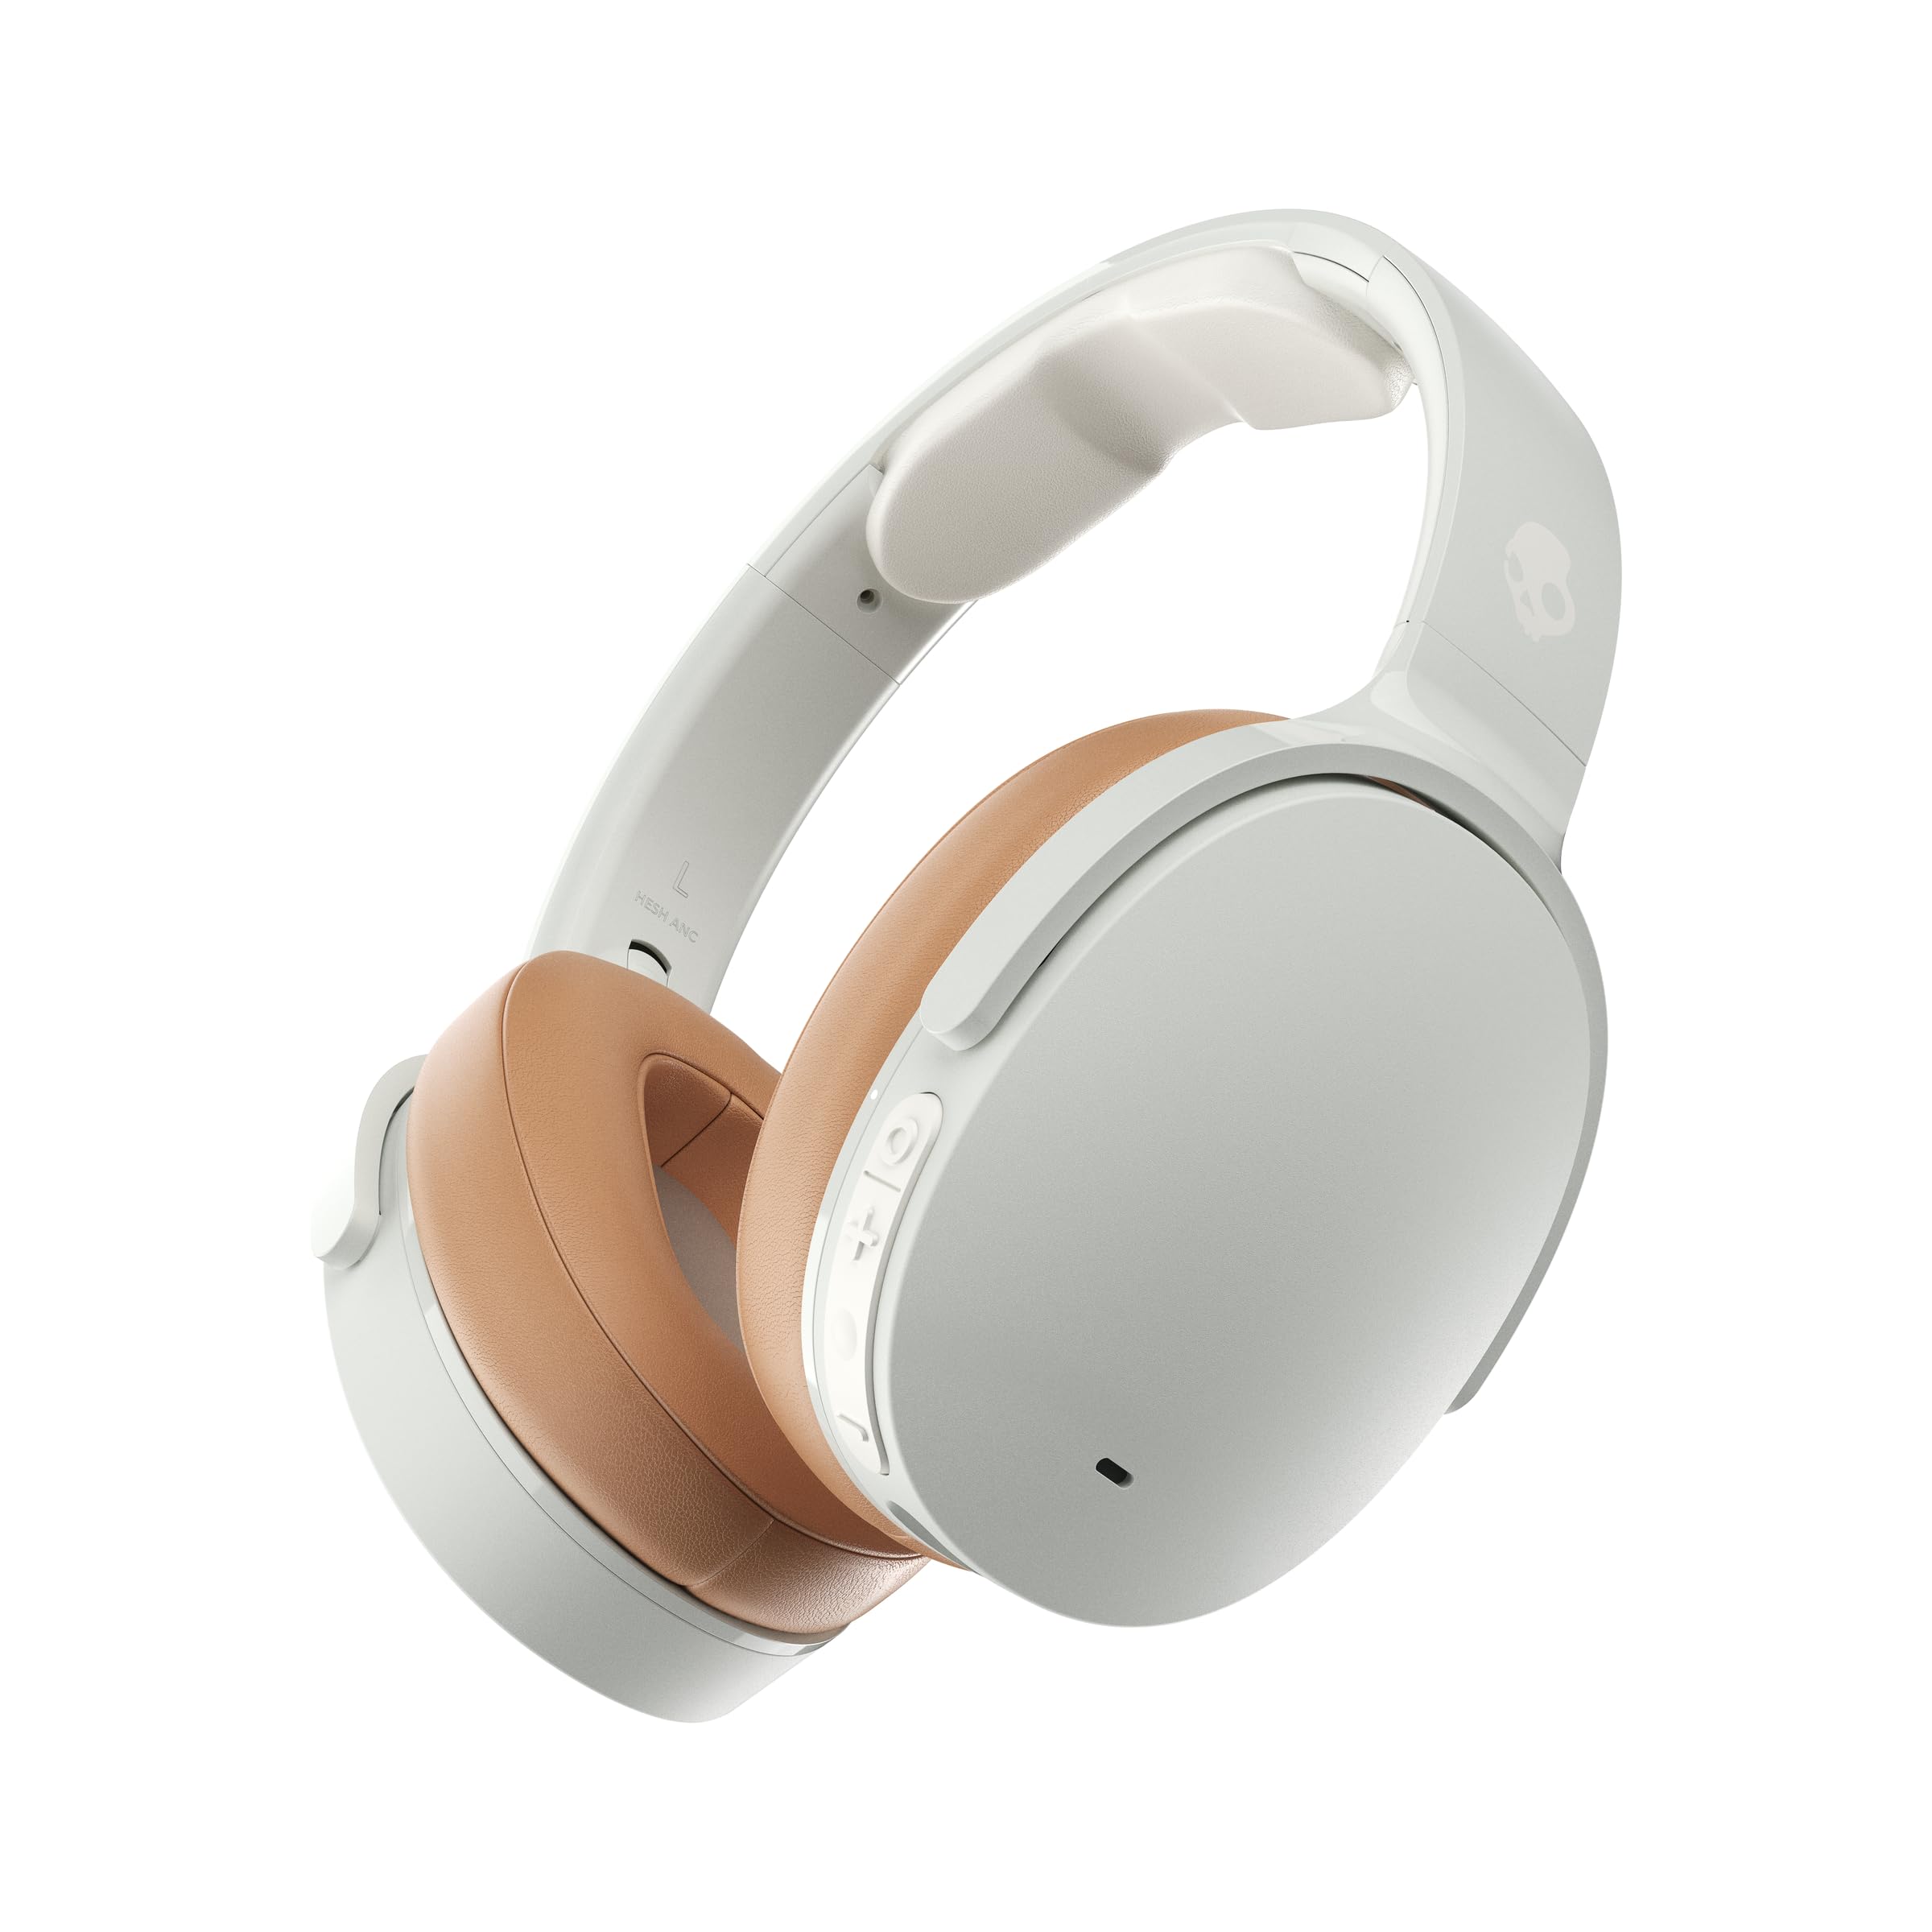 Skullcandy Hesh ANC Noise Canceling Over-Ear Wireless Headphones, 22 Hr Battery, Microphone, Works with iPhone Android and Bluetooth Devices - White